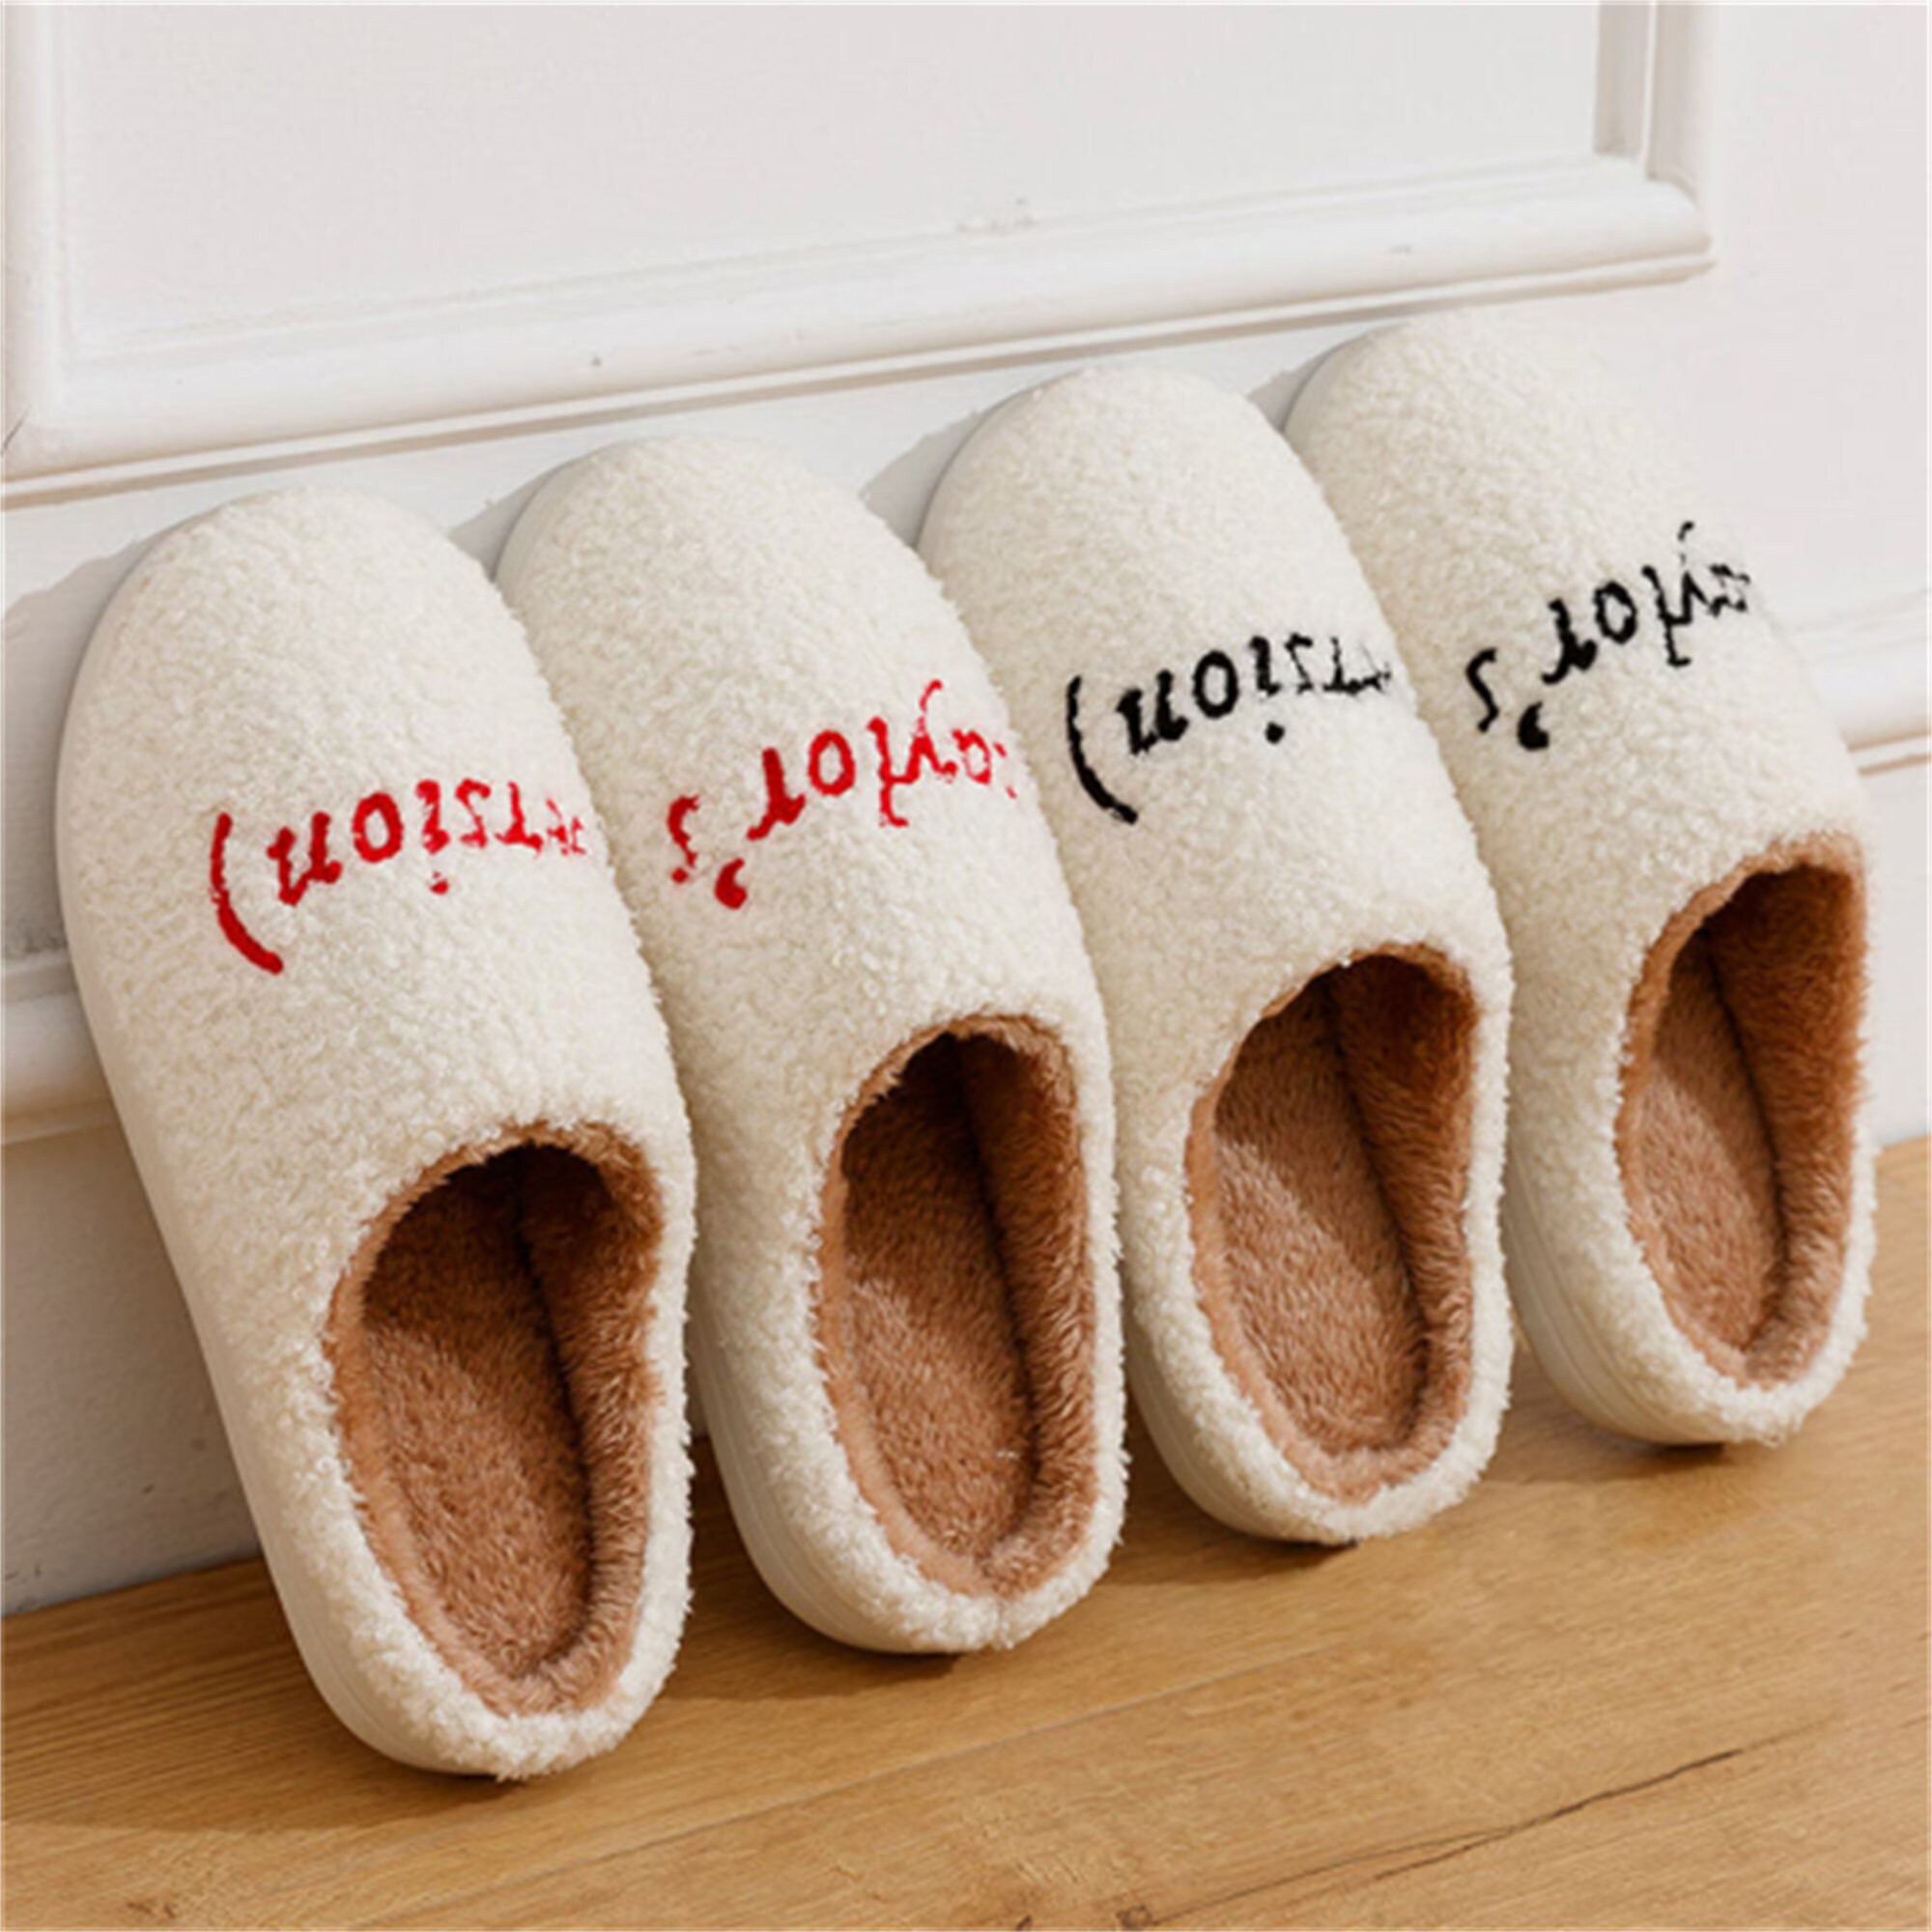 Discover Eras Version Slippers, Midnight Slippers Cozy, Taylor Slippers